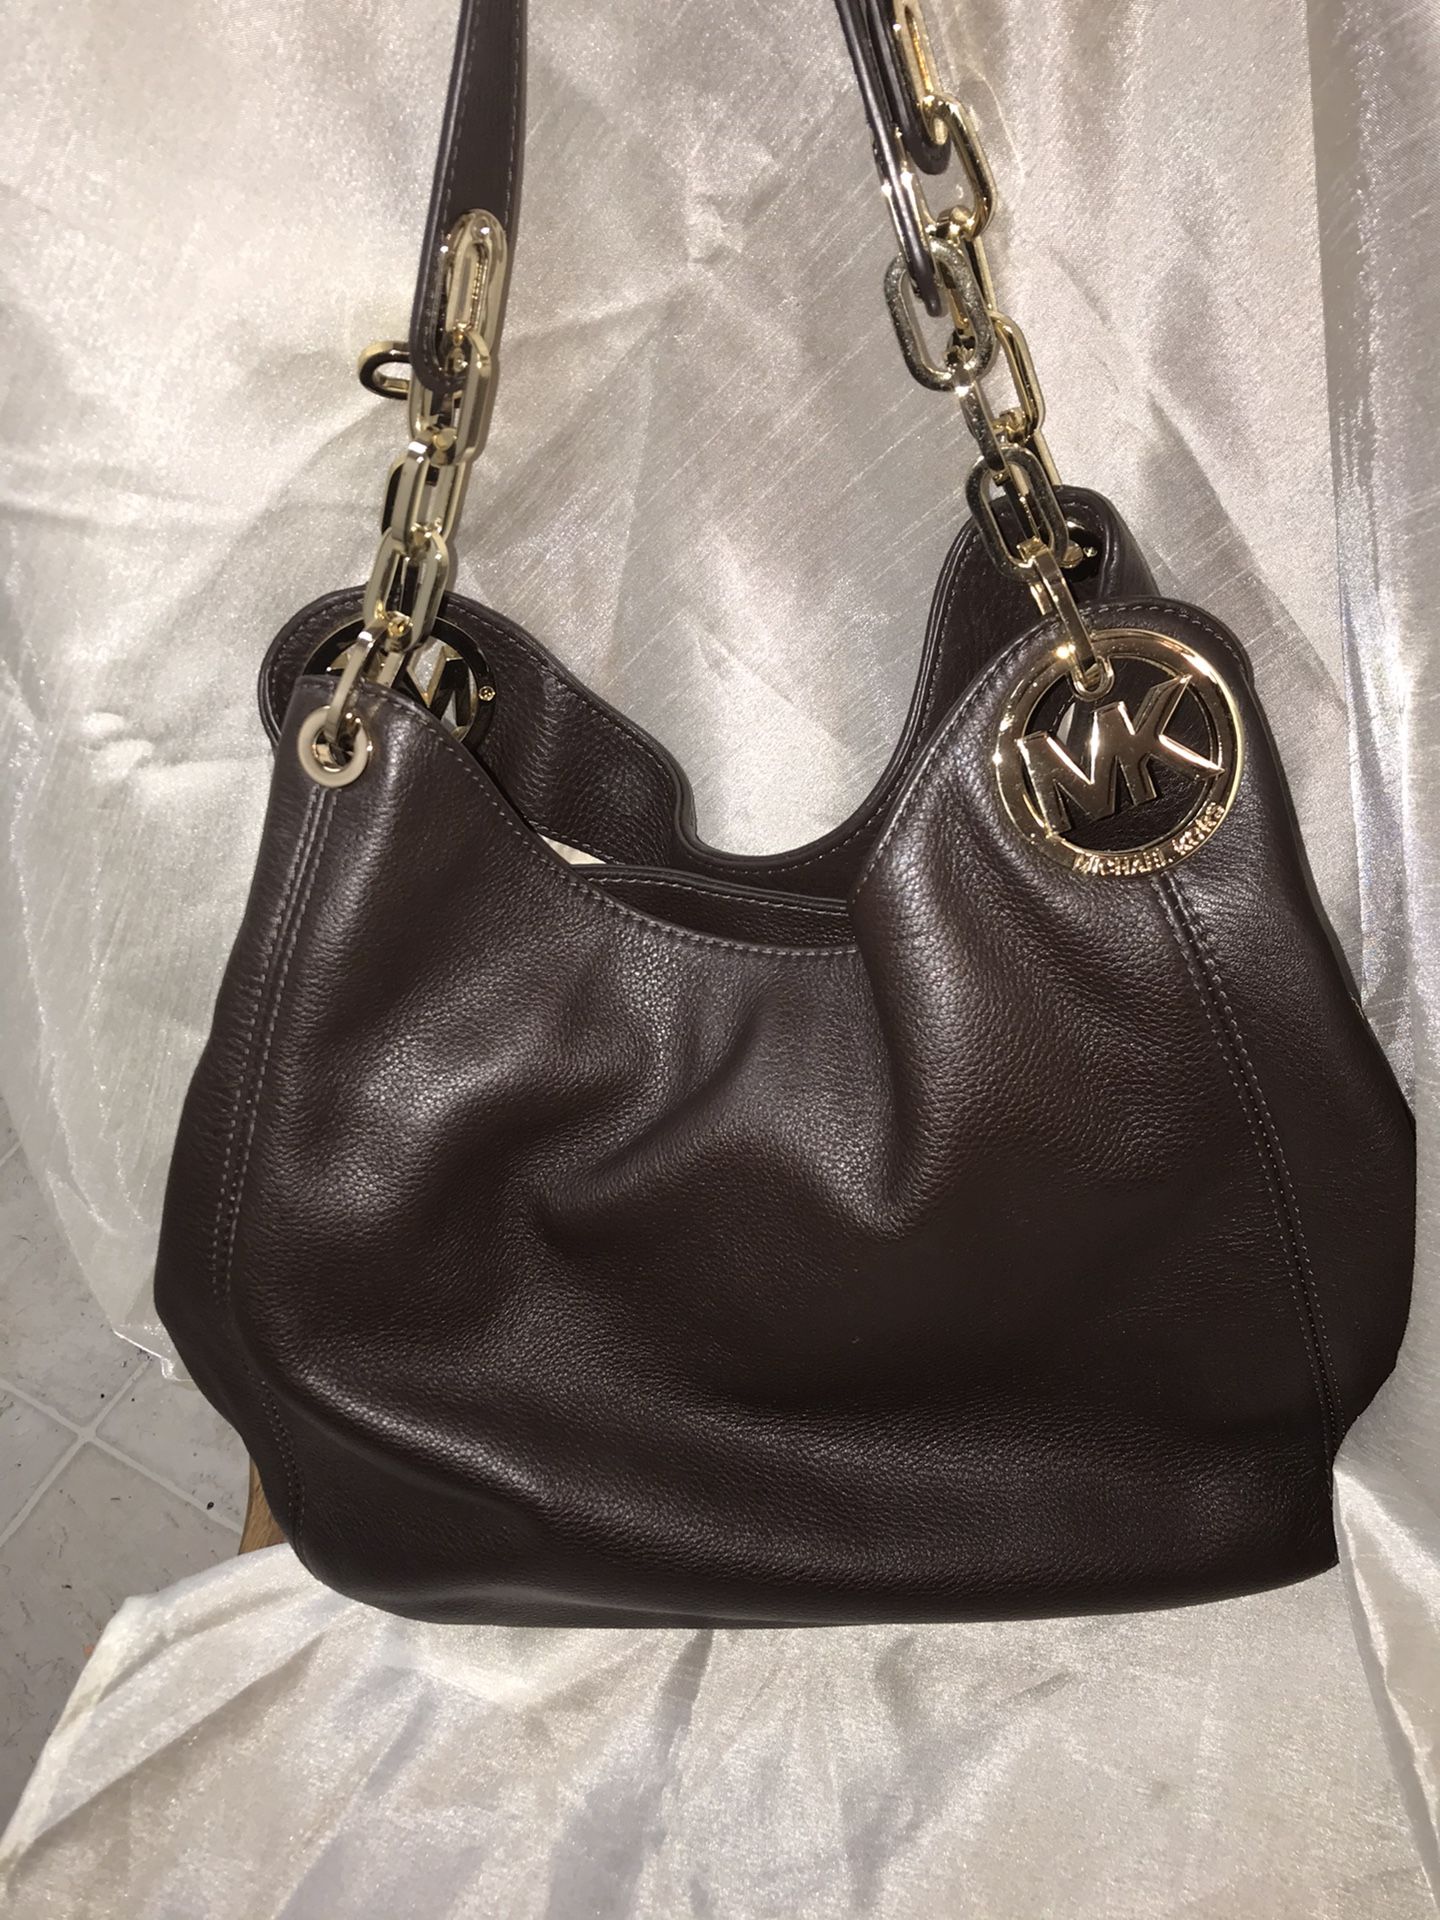 NWT MICHAEL KORS RICH BROWN LEATHER PURSE WITH GOLD CHAIN LING HANDLE